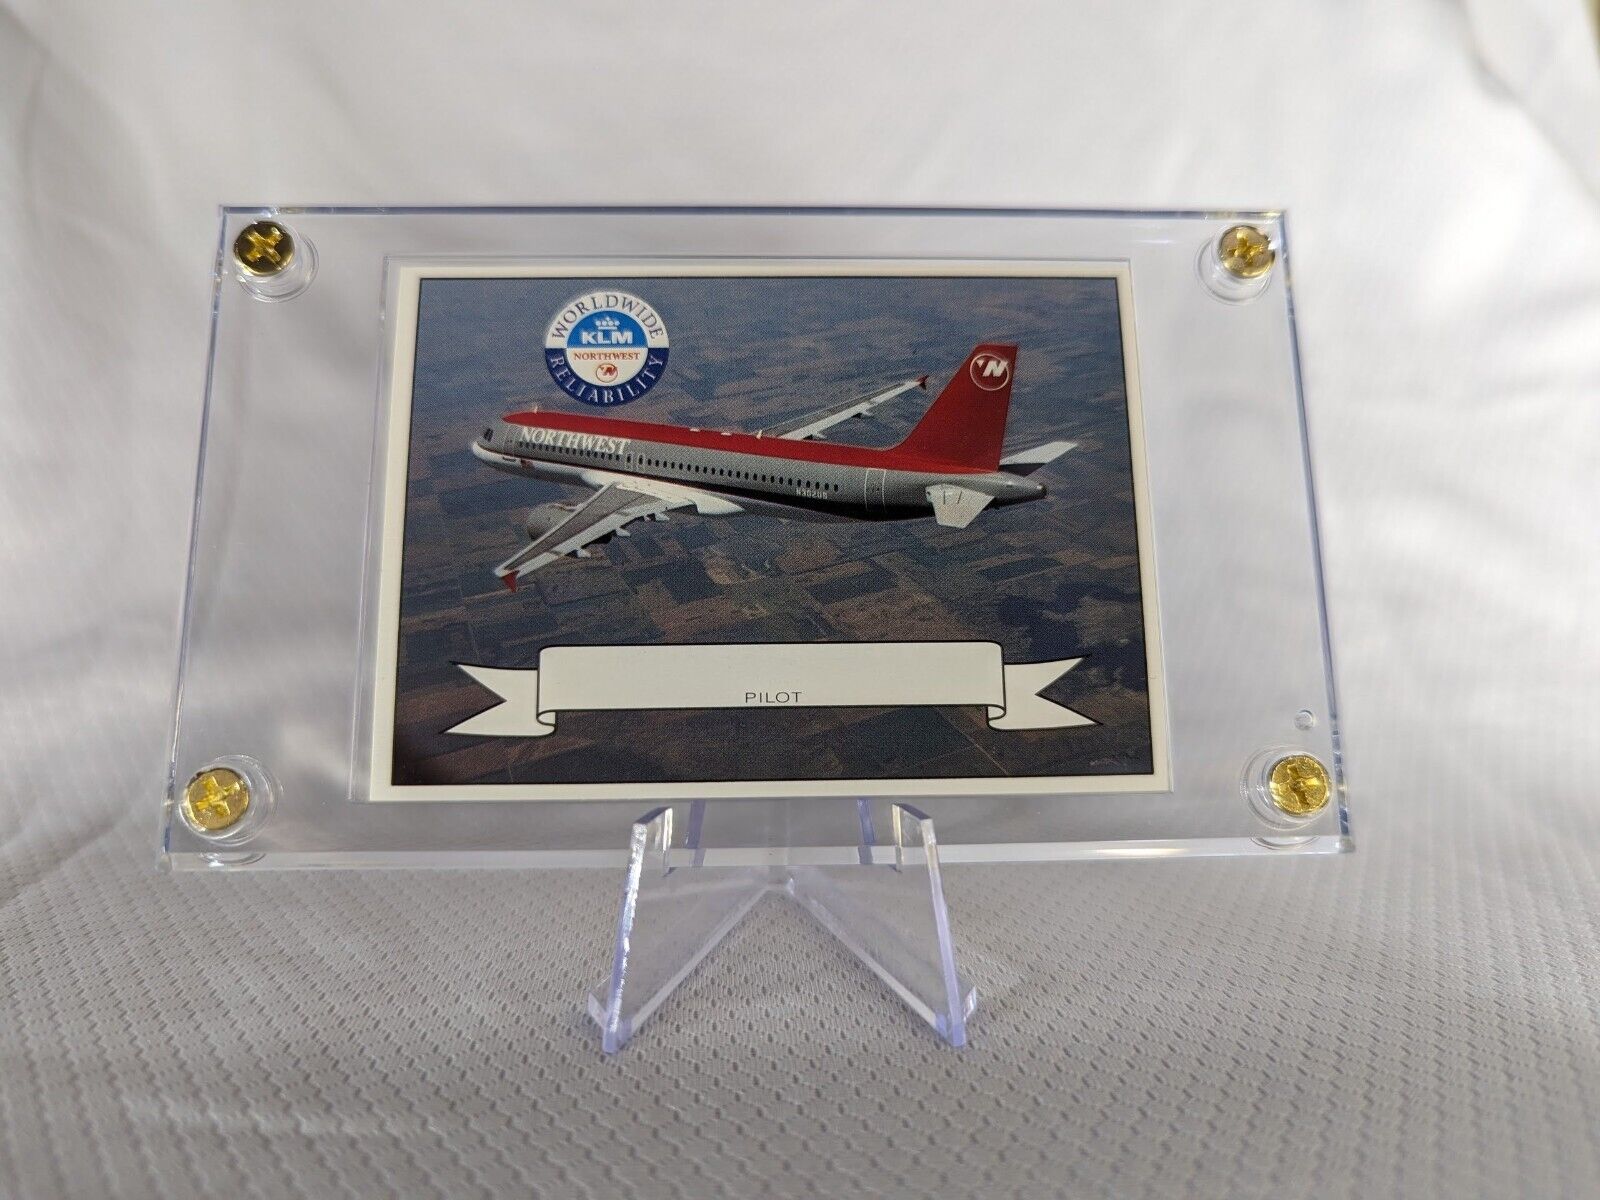 Northwest Airlines Airbus A320 Airplane Pilot Collector Card In Display Case KLM